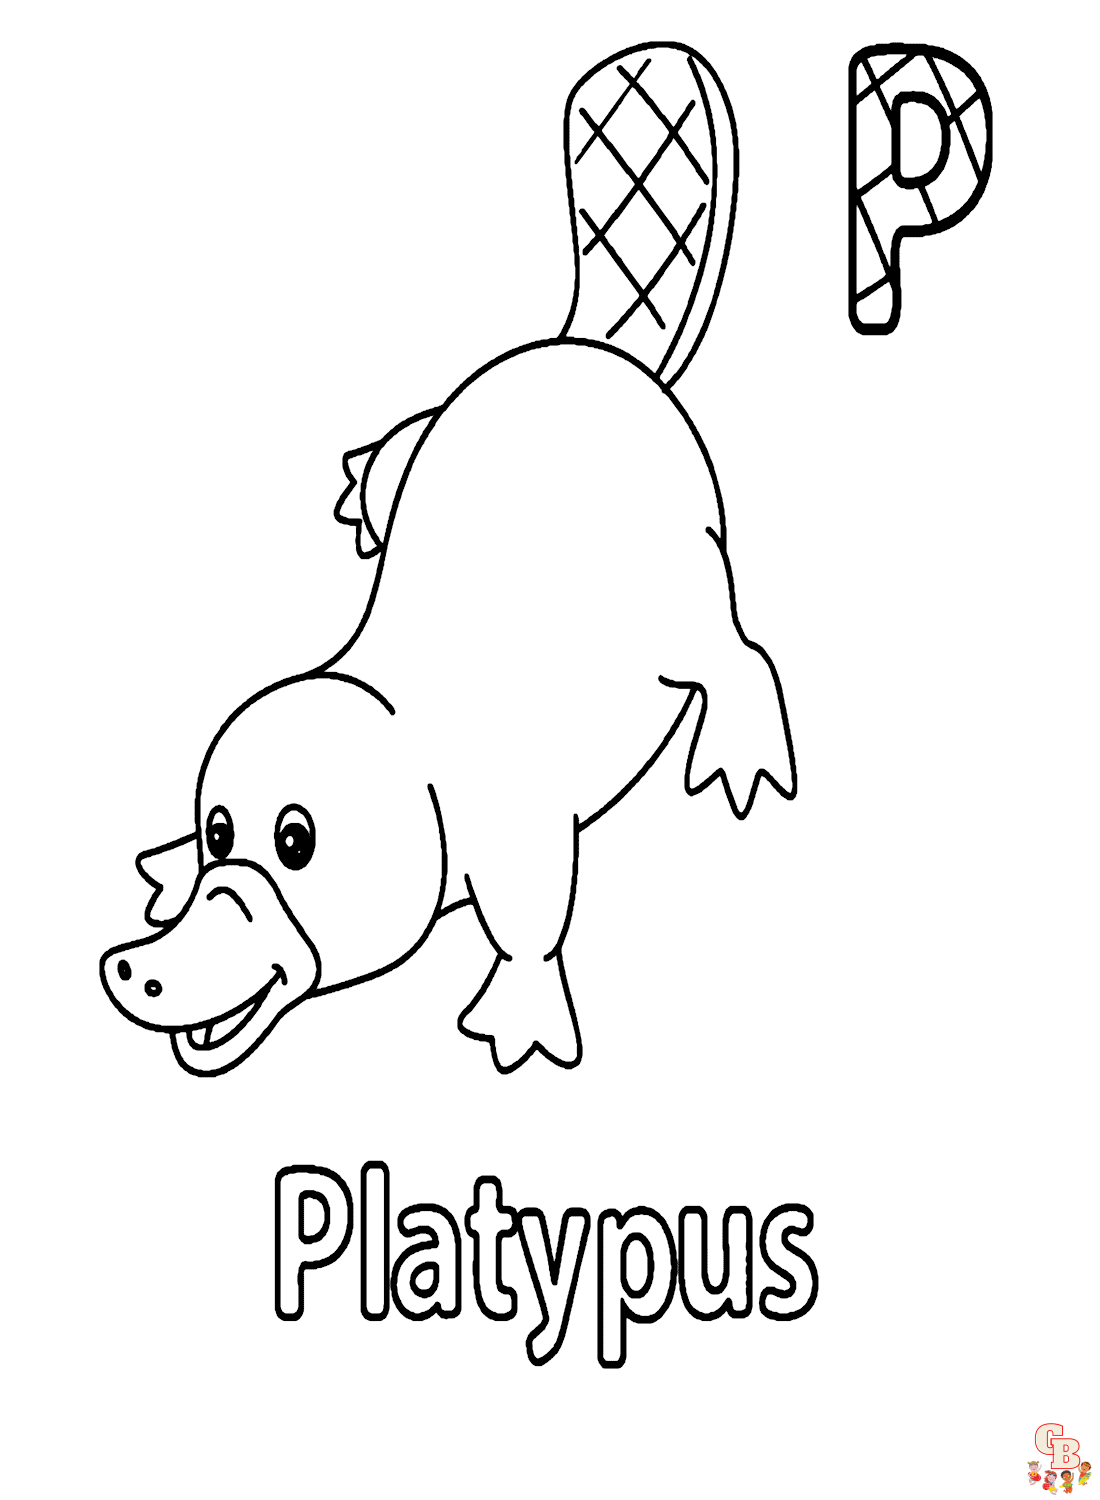 Letter p for platypus